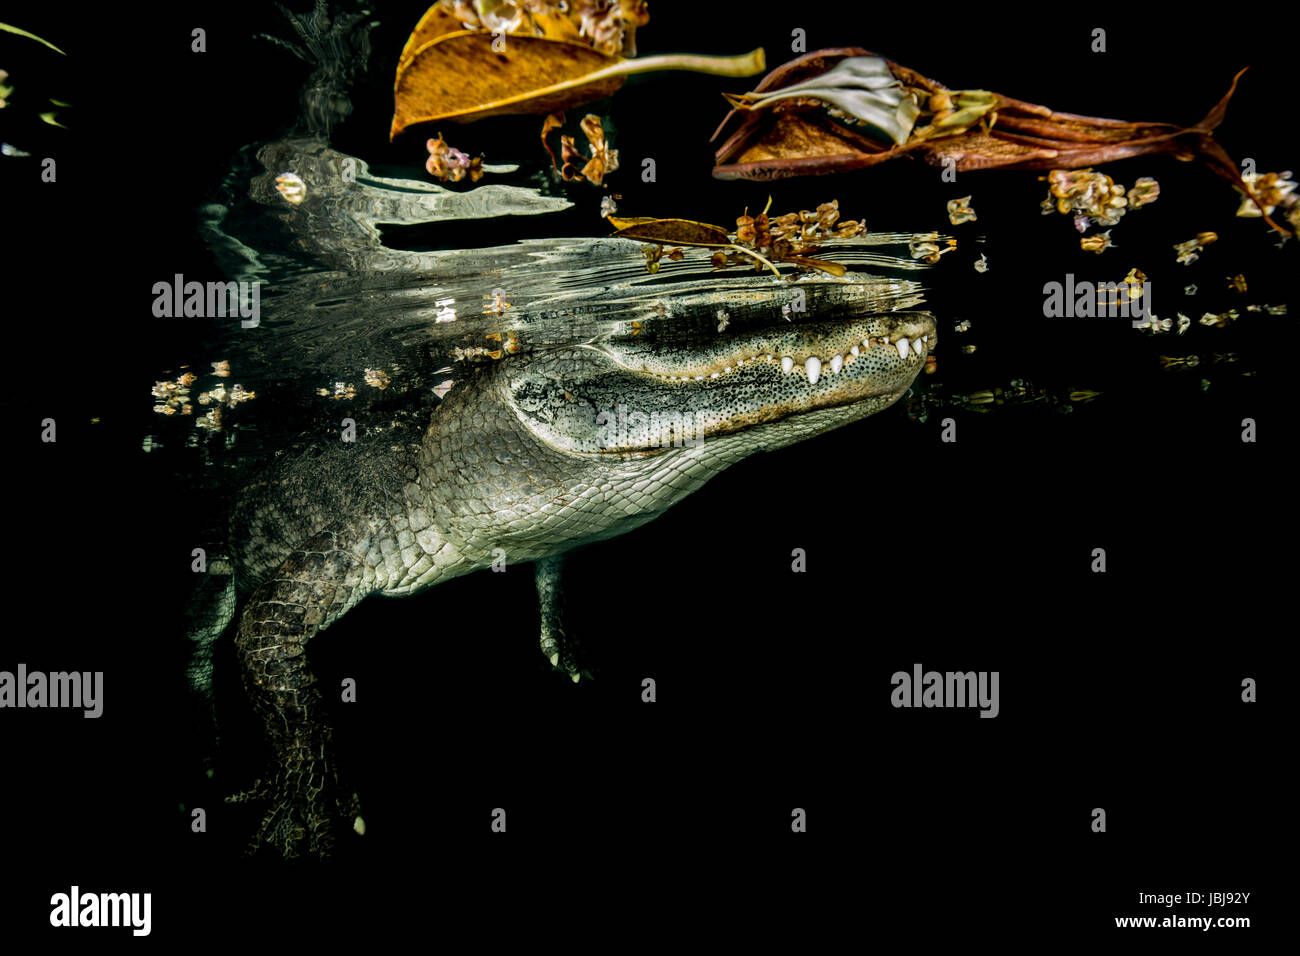 underwater shot of american alligator at night at the waters surface where you can see its reflection on the underside of the waters surface Stock Photo